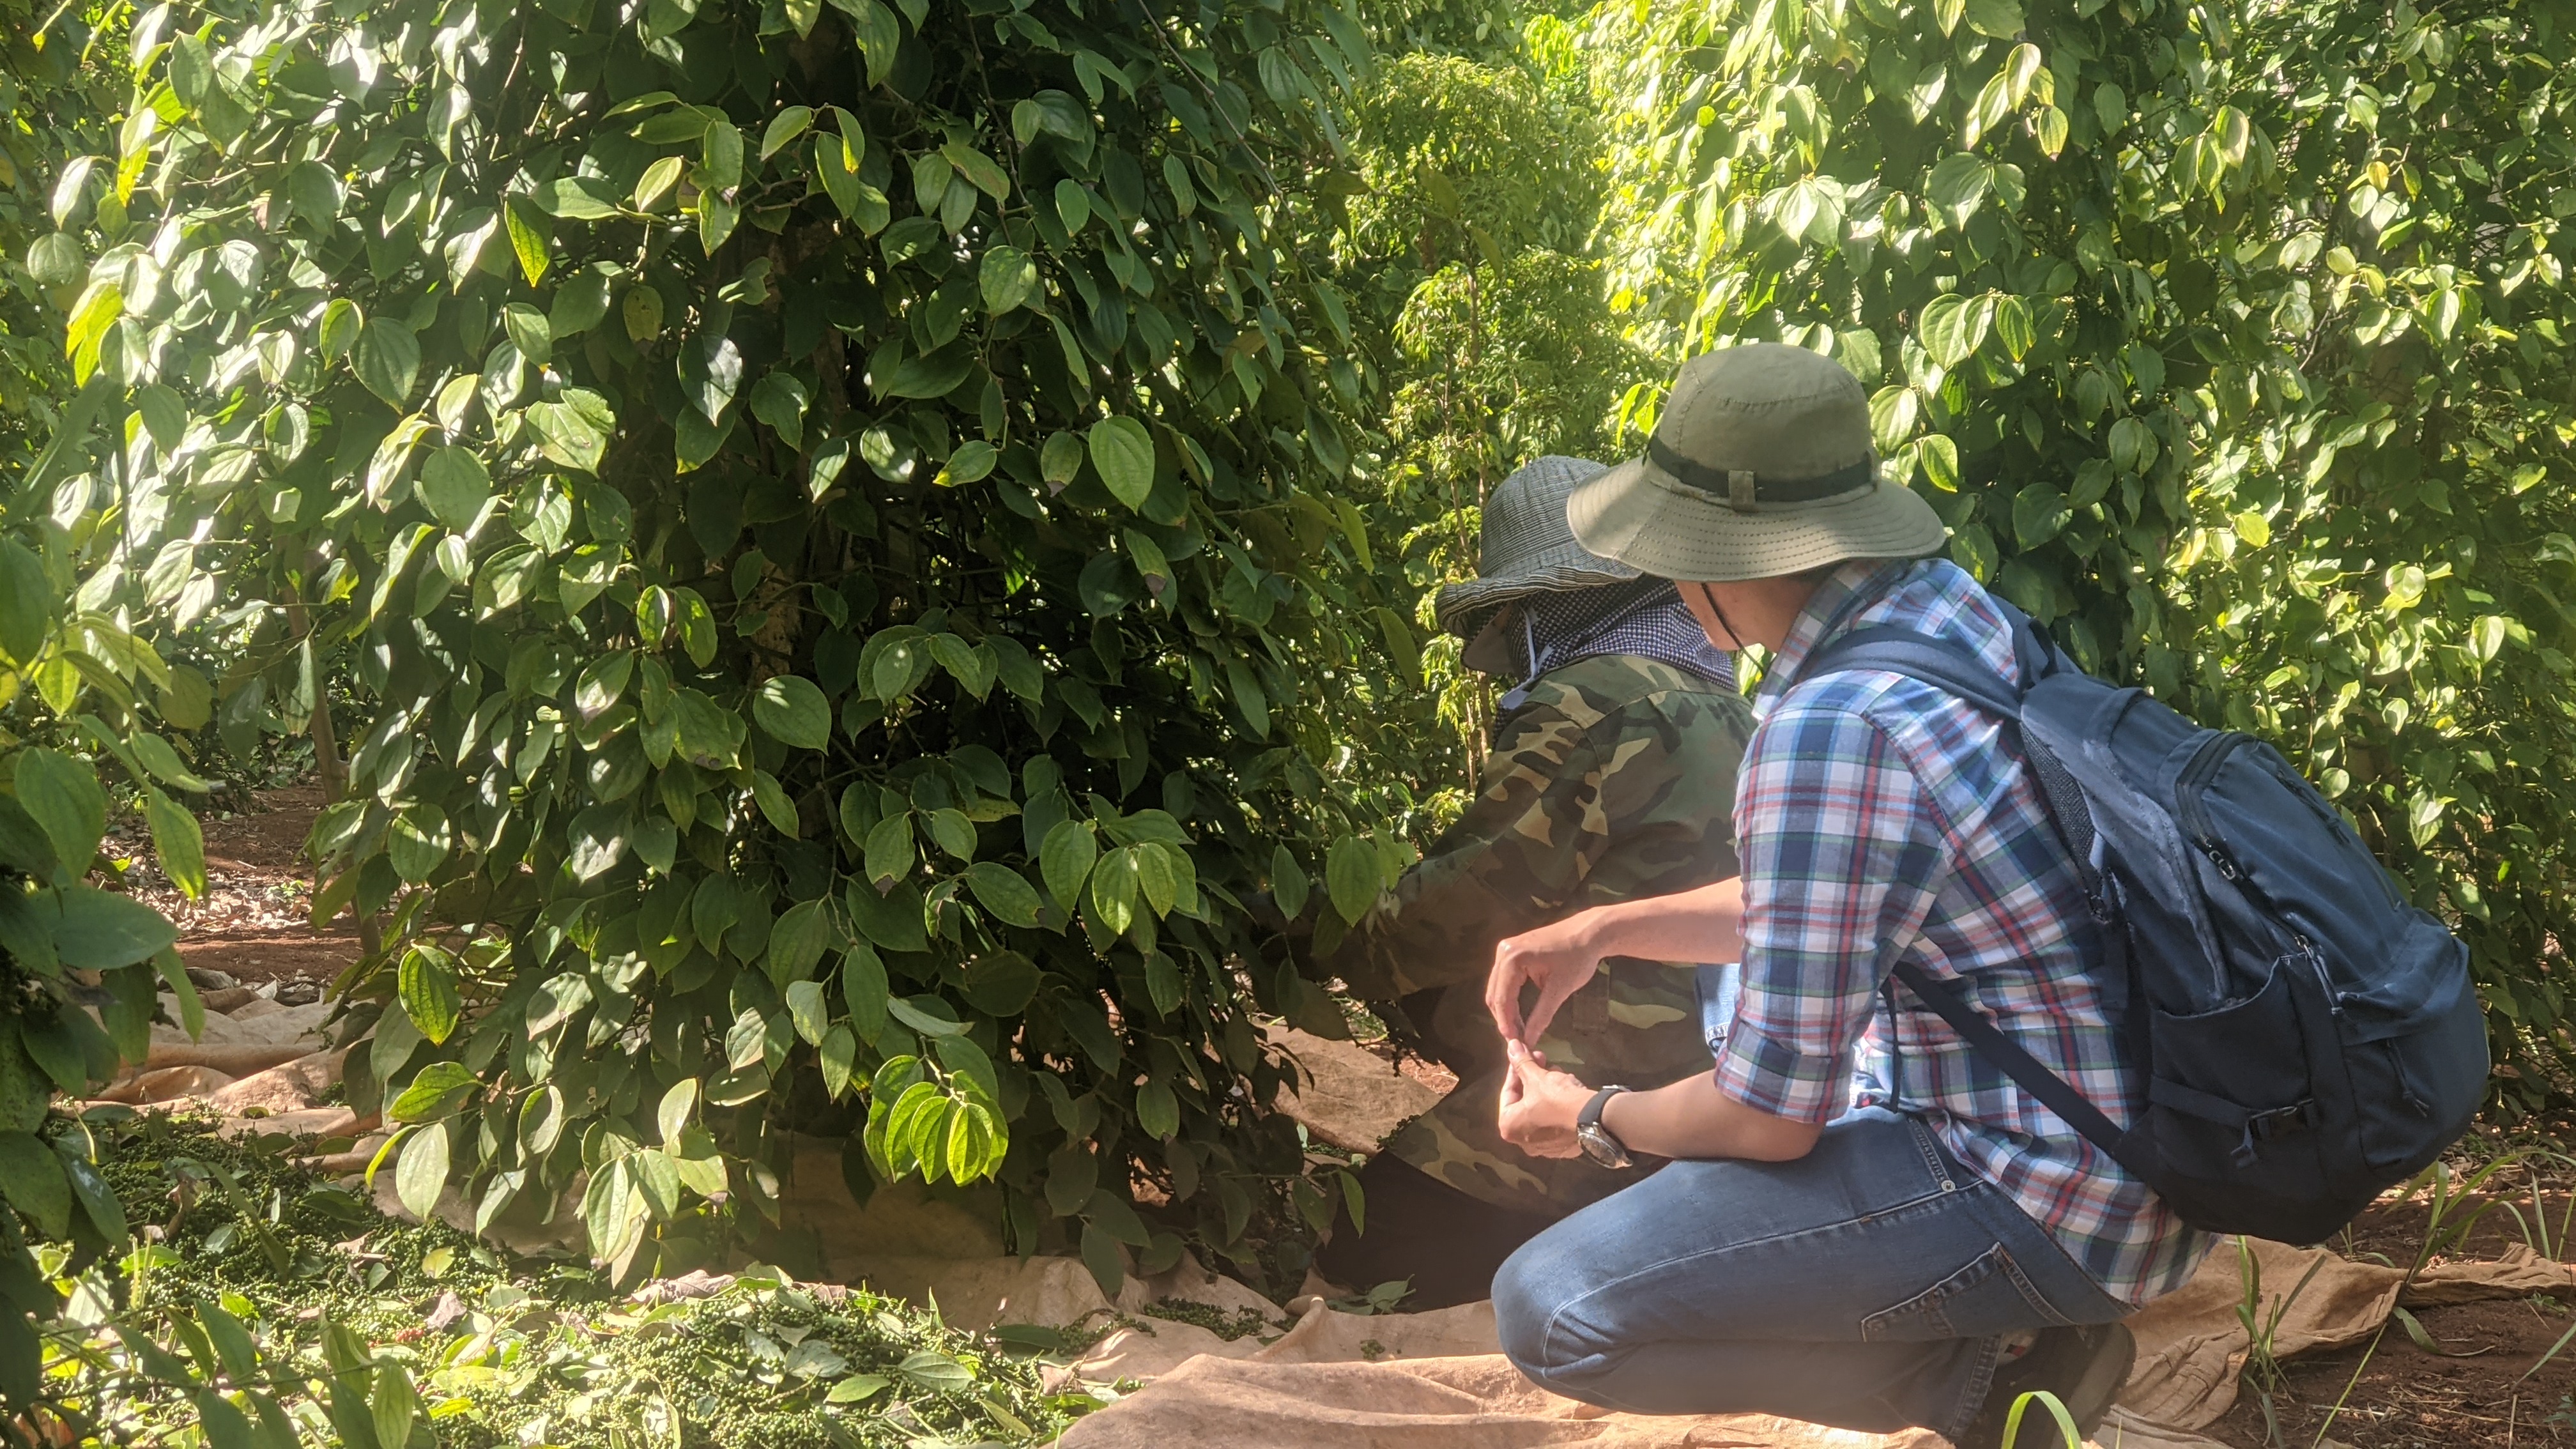 Vietnam staff conducting a child rights risk and impact assessment in Vietnam's pepper plantations